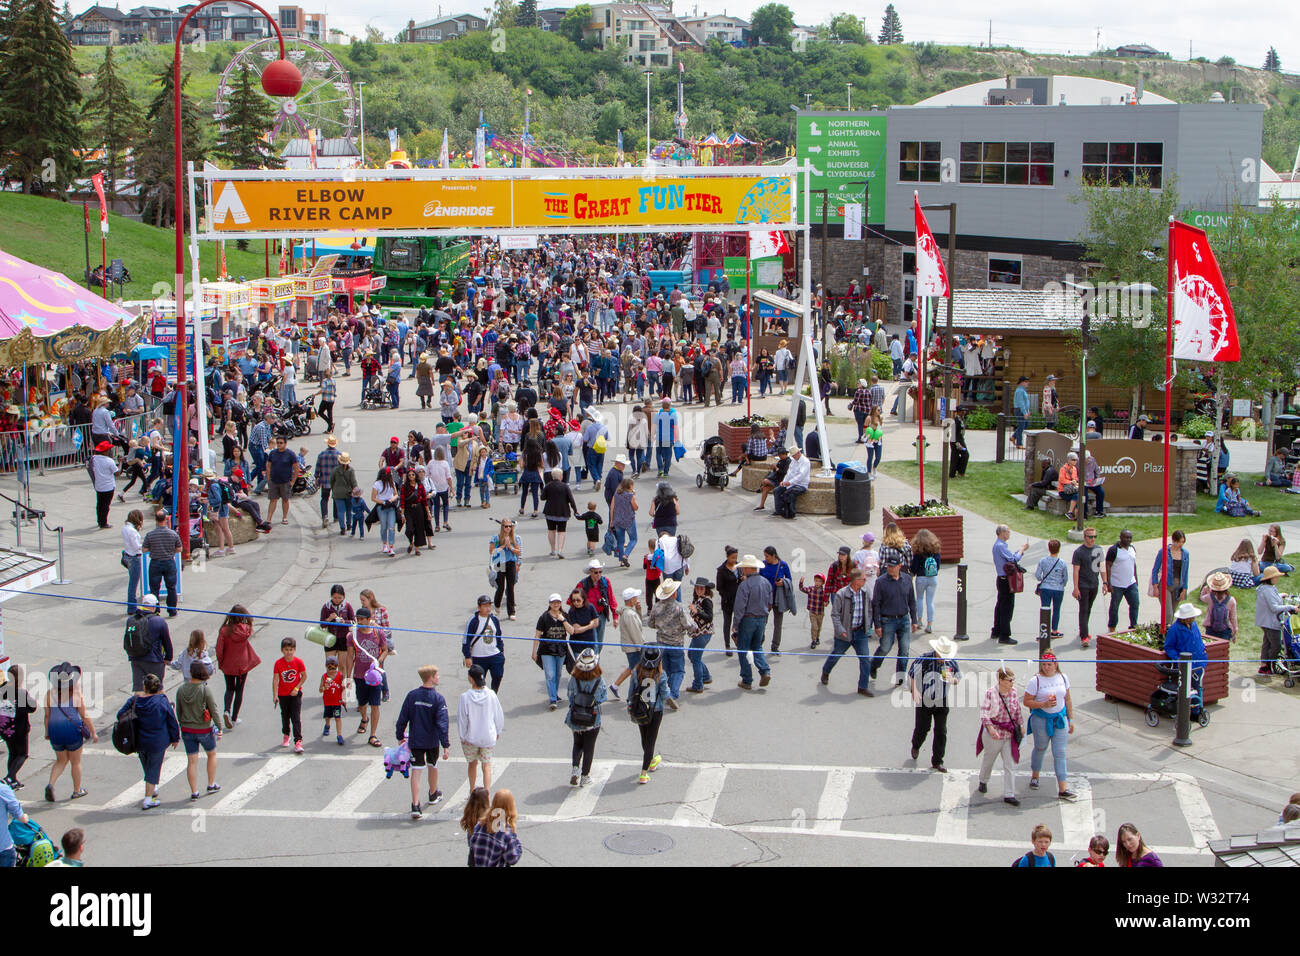 CALGARY, CANADA - JULY 9, 2019: A crowd filled the street on Olympic Way SE at the annual Calgary Stampede event. The Calgary Stampede is often called Stock Photo